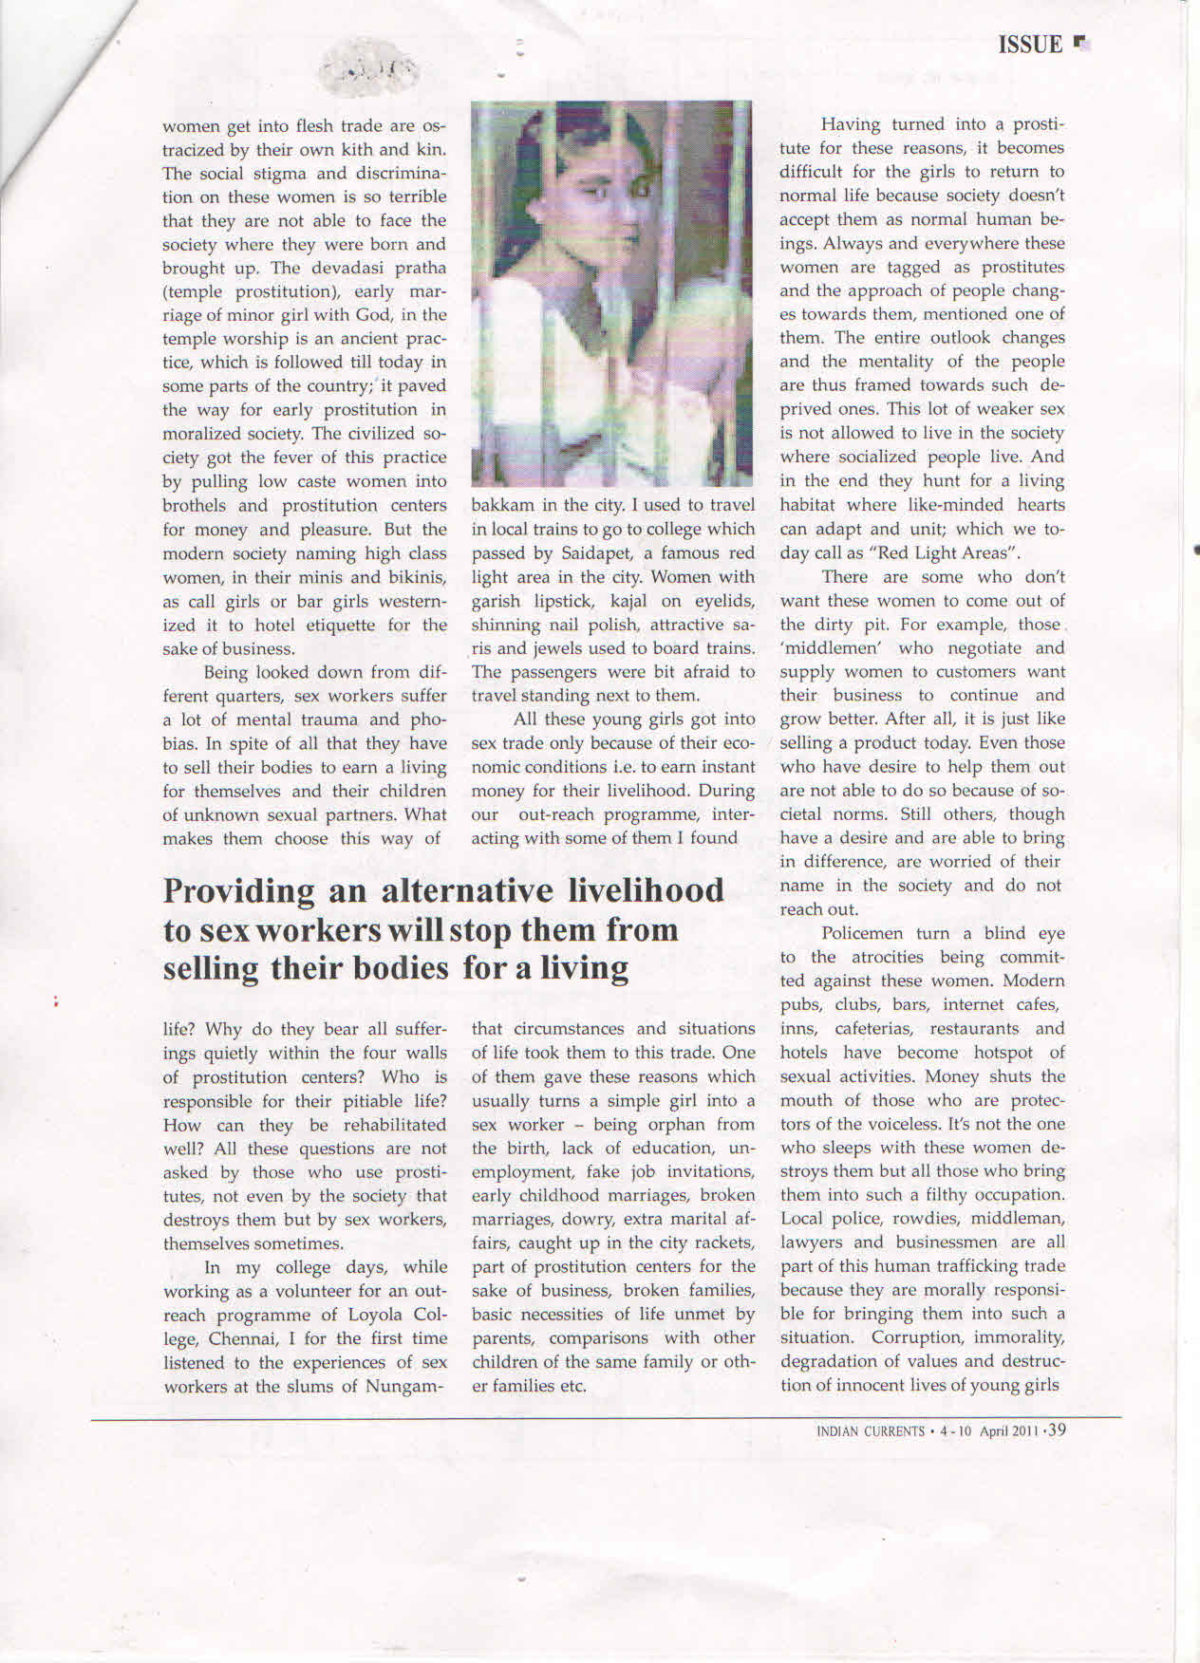 INDIA CURRENTS - DELHI  Life for Sex Workers - Page 2  04-10-April-2010